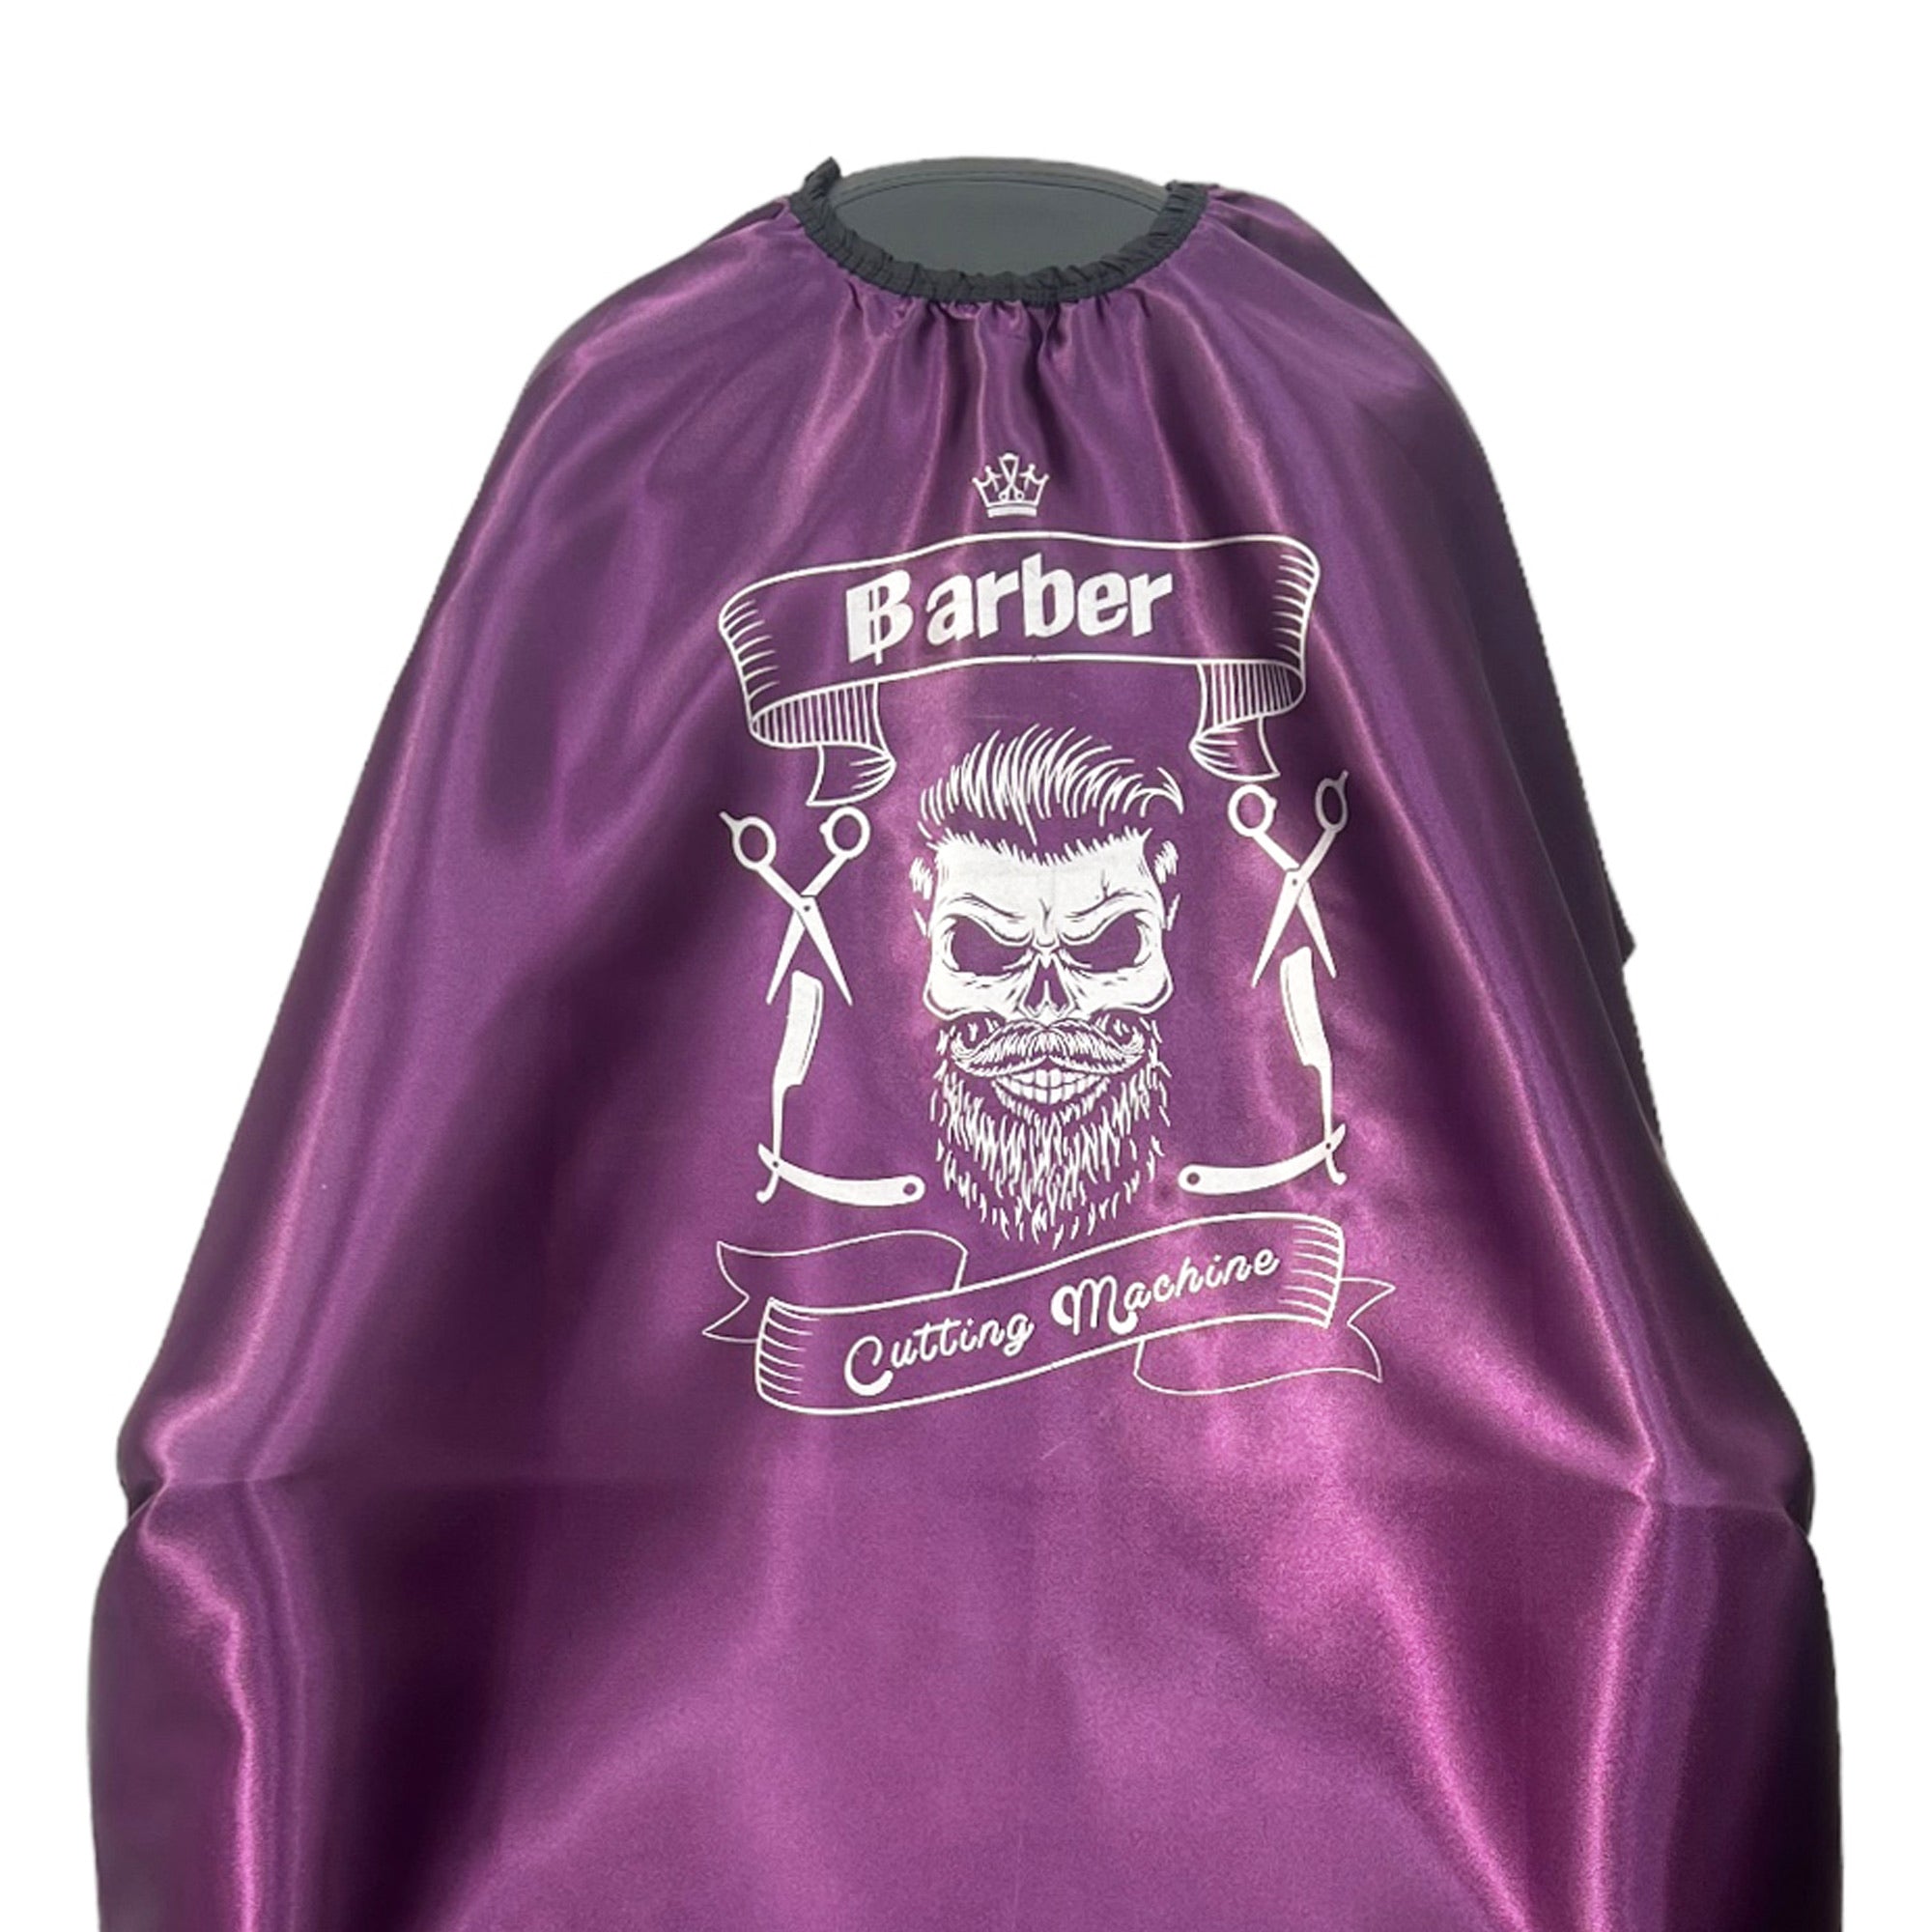 Gabri - Barber Hairdressing Hair Cutting Capes & Gowns Tools Pattern (Damson)